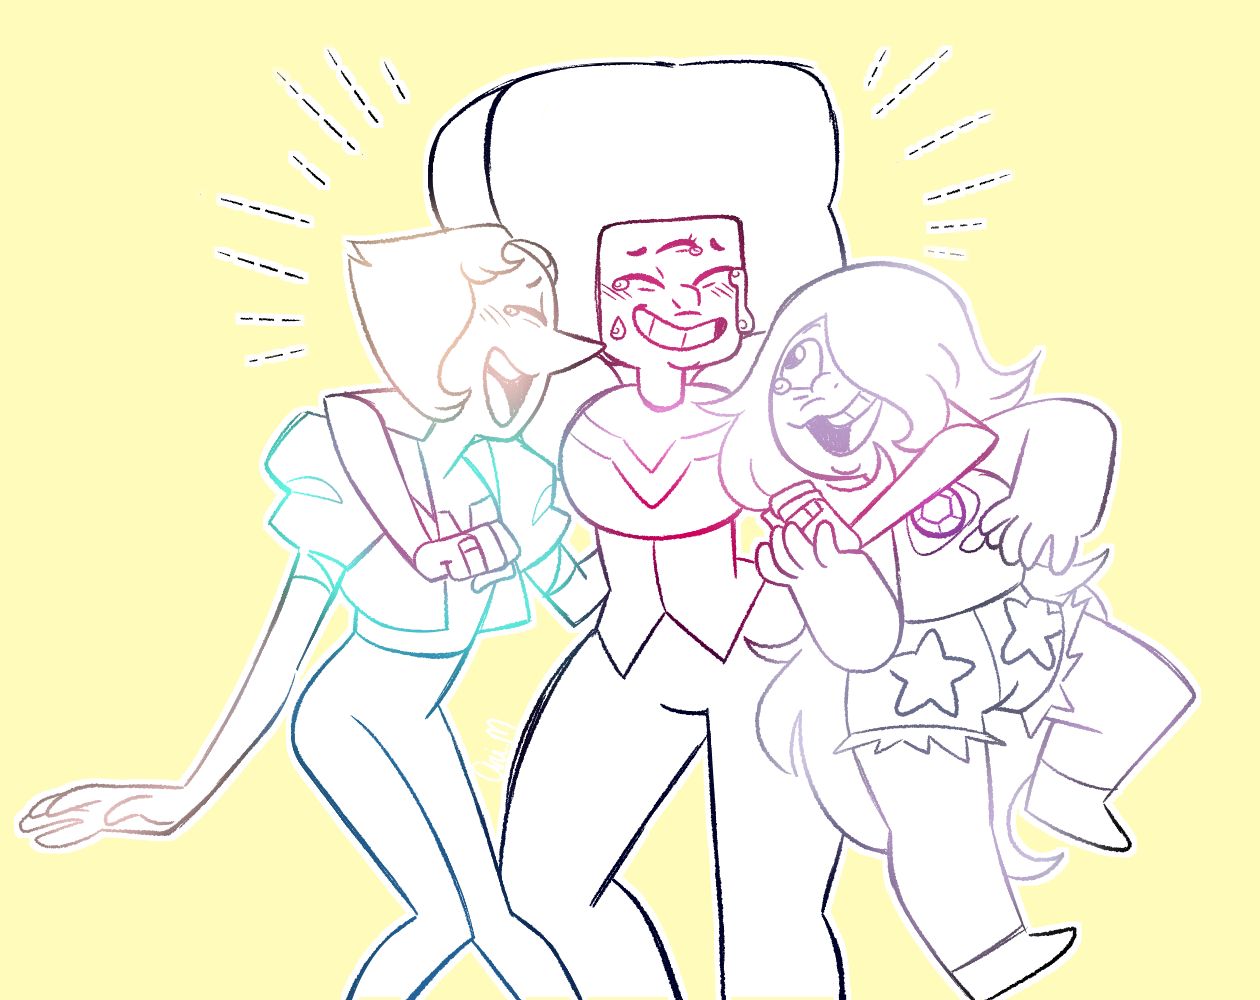 thank u steven universe for my life :’)